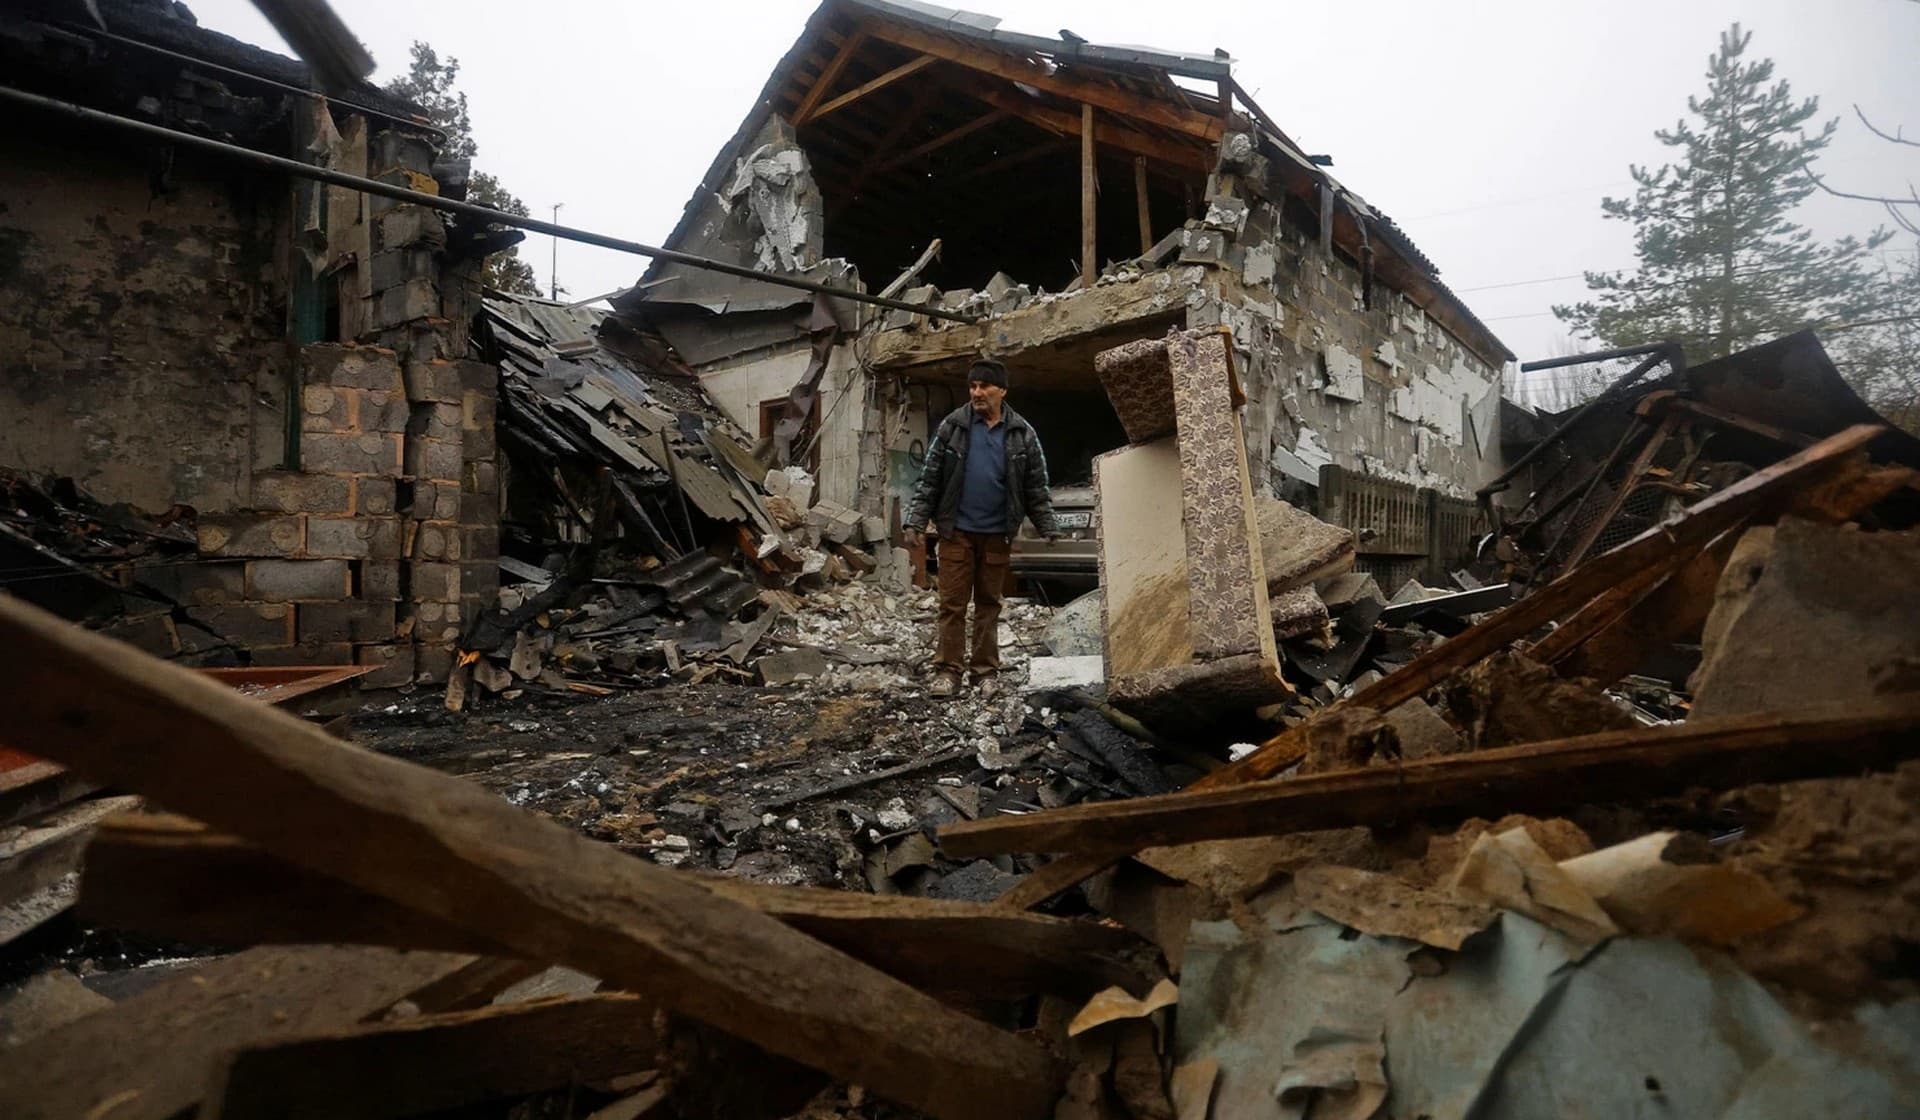 Local resident Amiram stands next to his friend's house that was destroyed by recent shelling in Donetsk